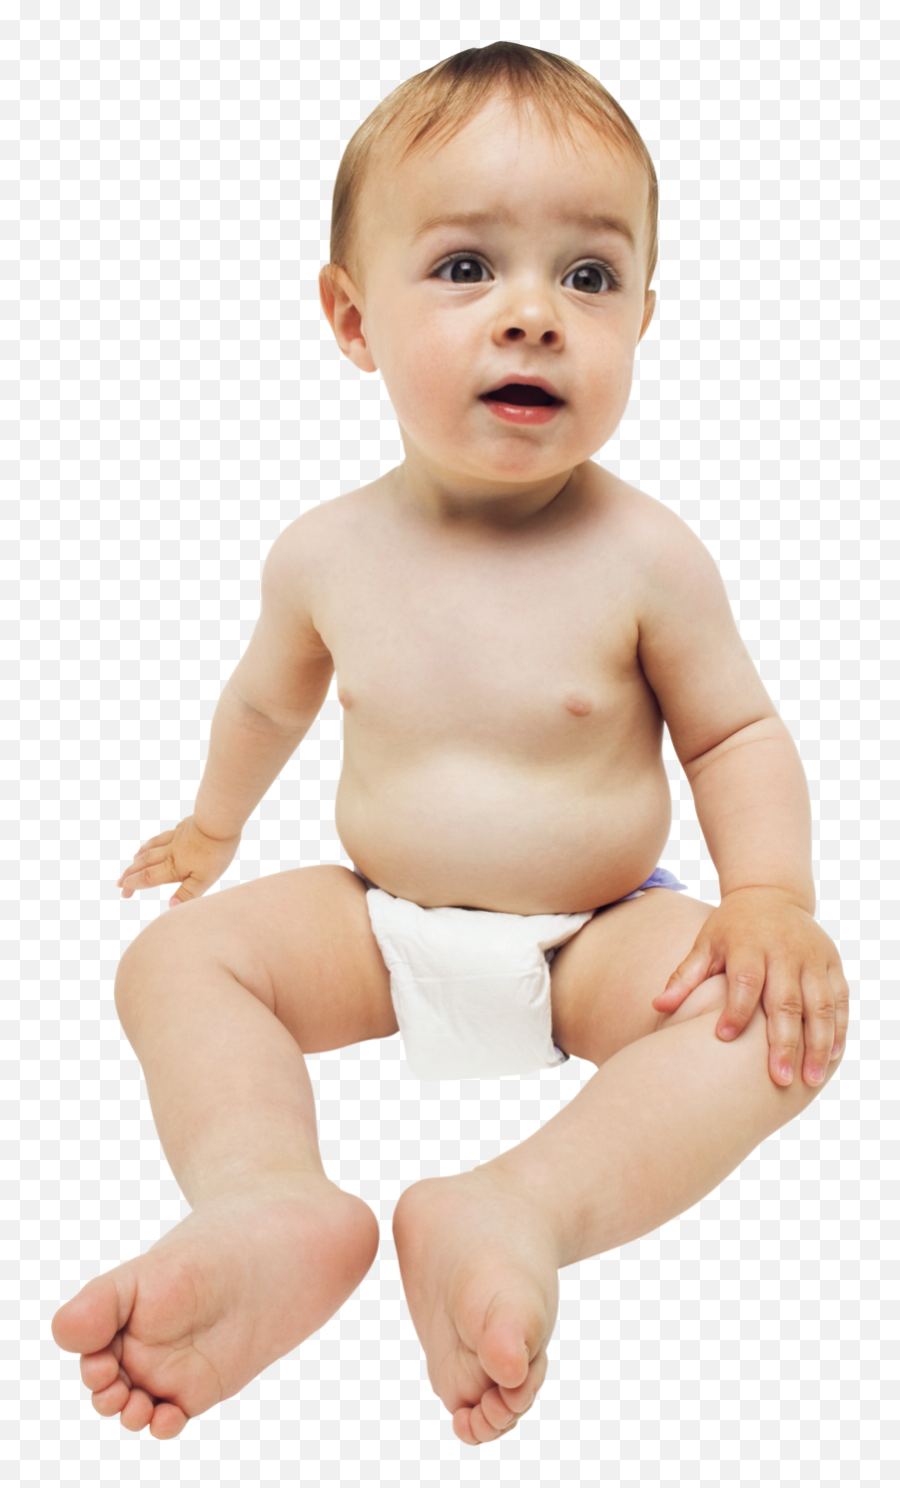 Download Free Png Background - Babytransparentchild Dlpngcom Baby Body Transparent Background,Baby Transparent Background